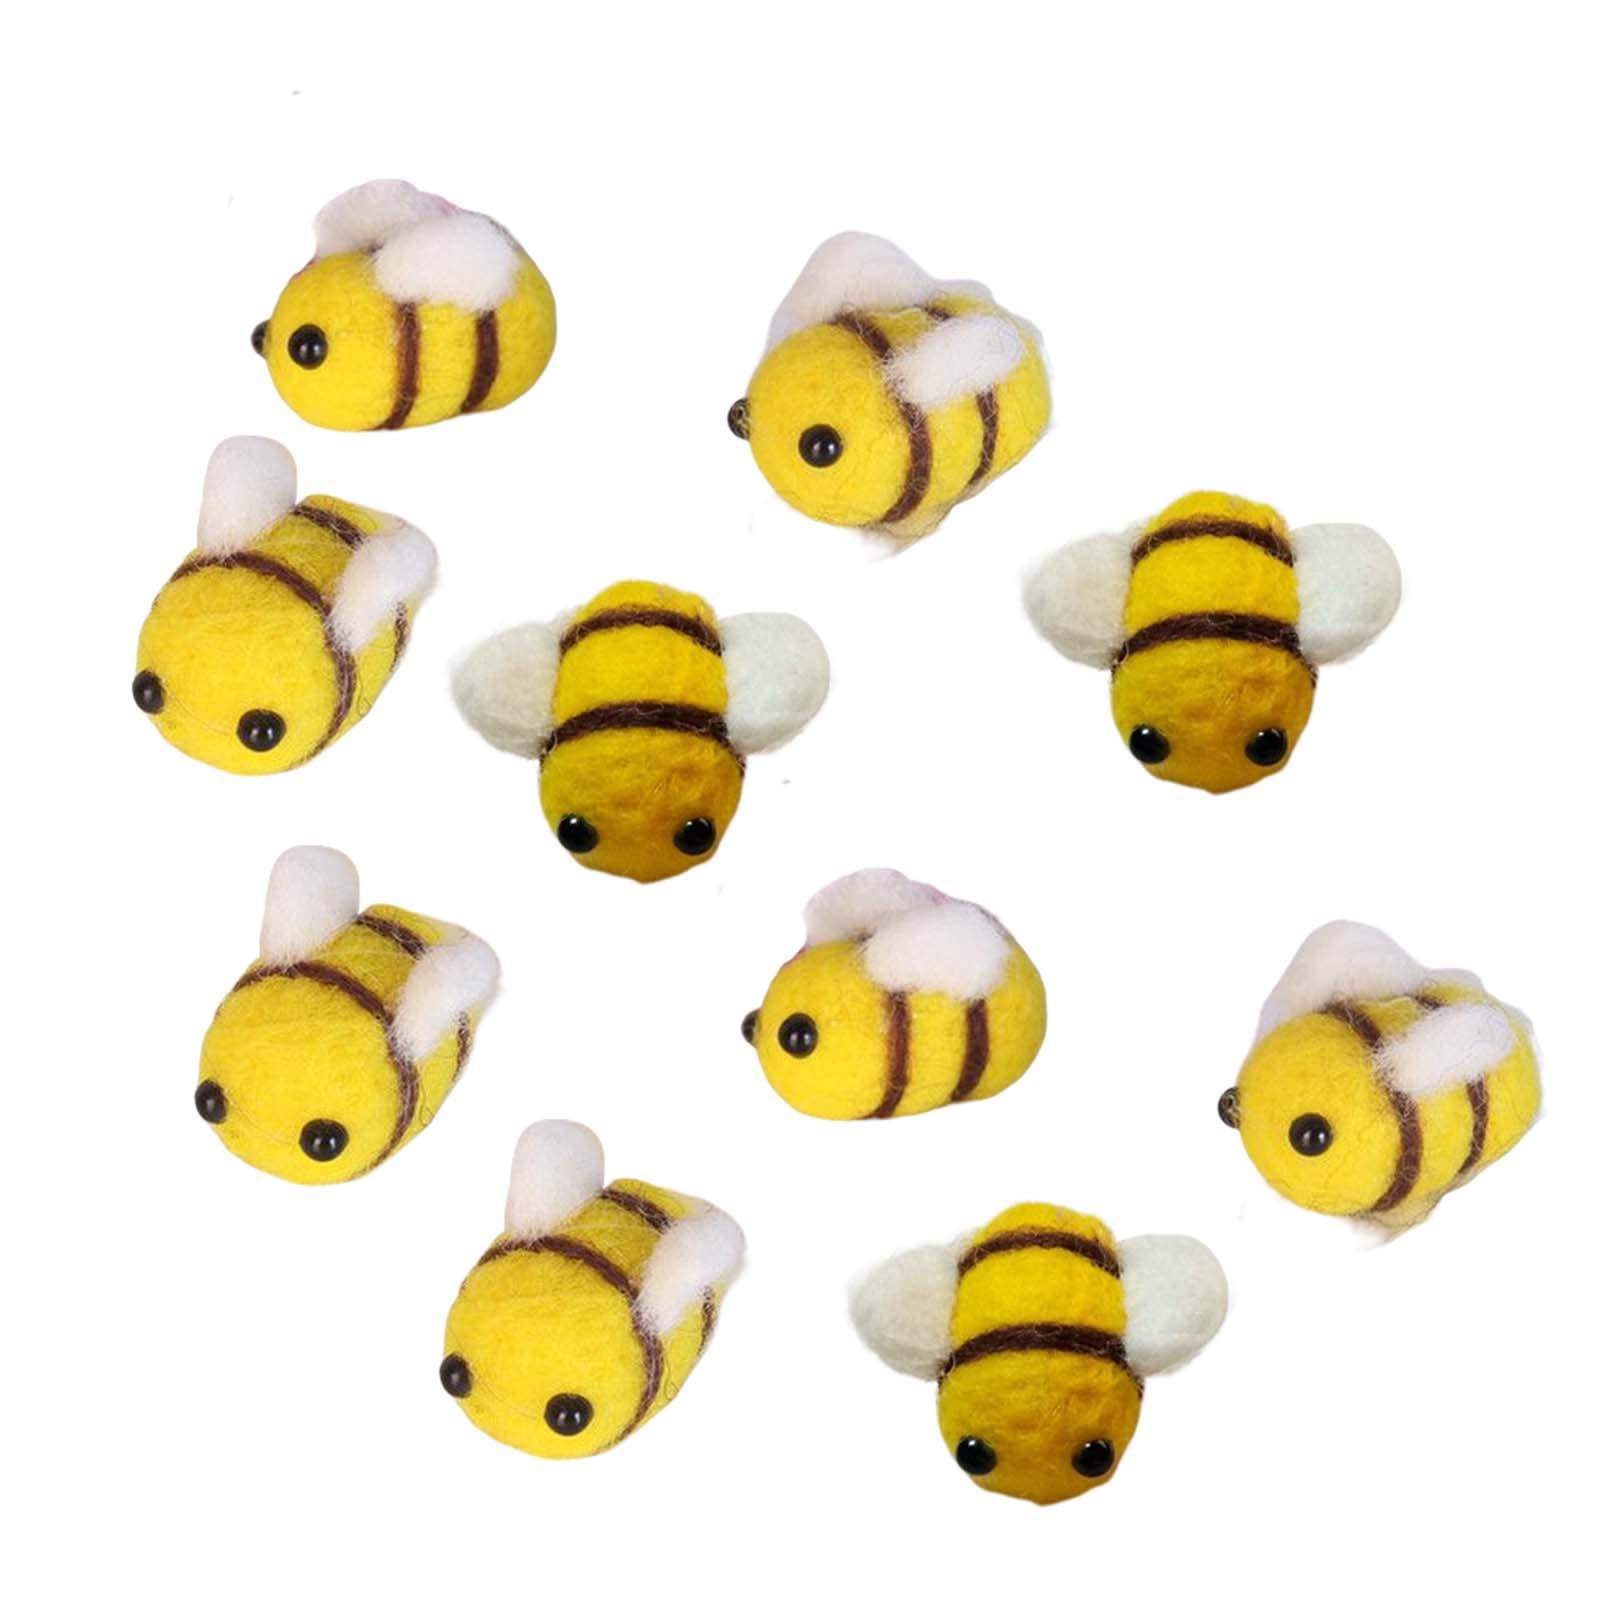 CINPIUK 12 Set Felt Bees for Crafts, Wool Felt Bumble Bee Plush for Tiered  Tray Decoration Party Favors DIY Craft Jewelry Accessory